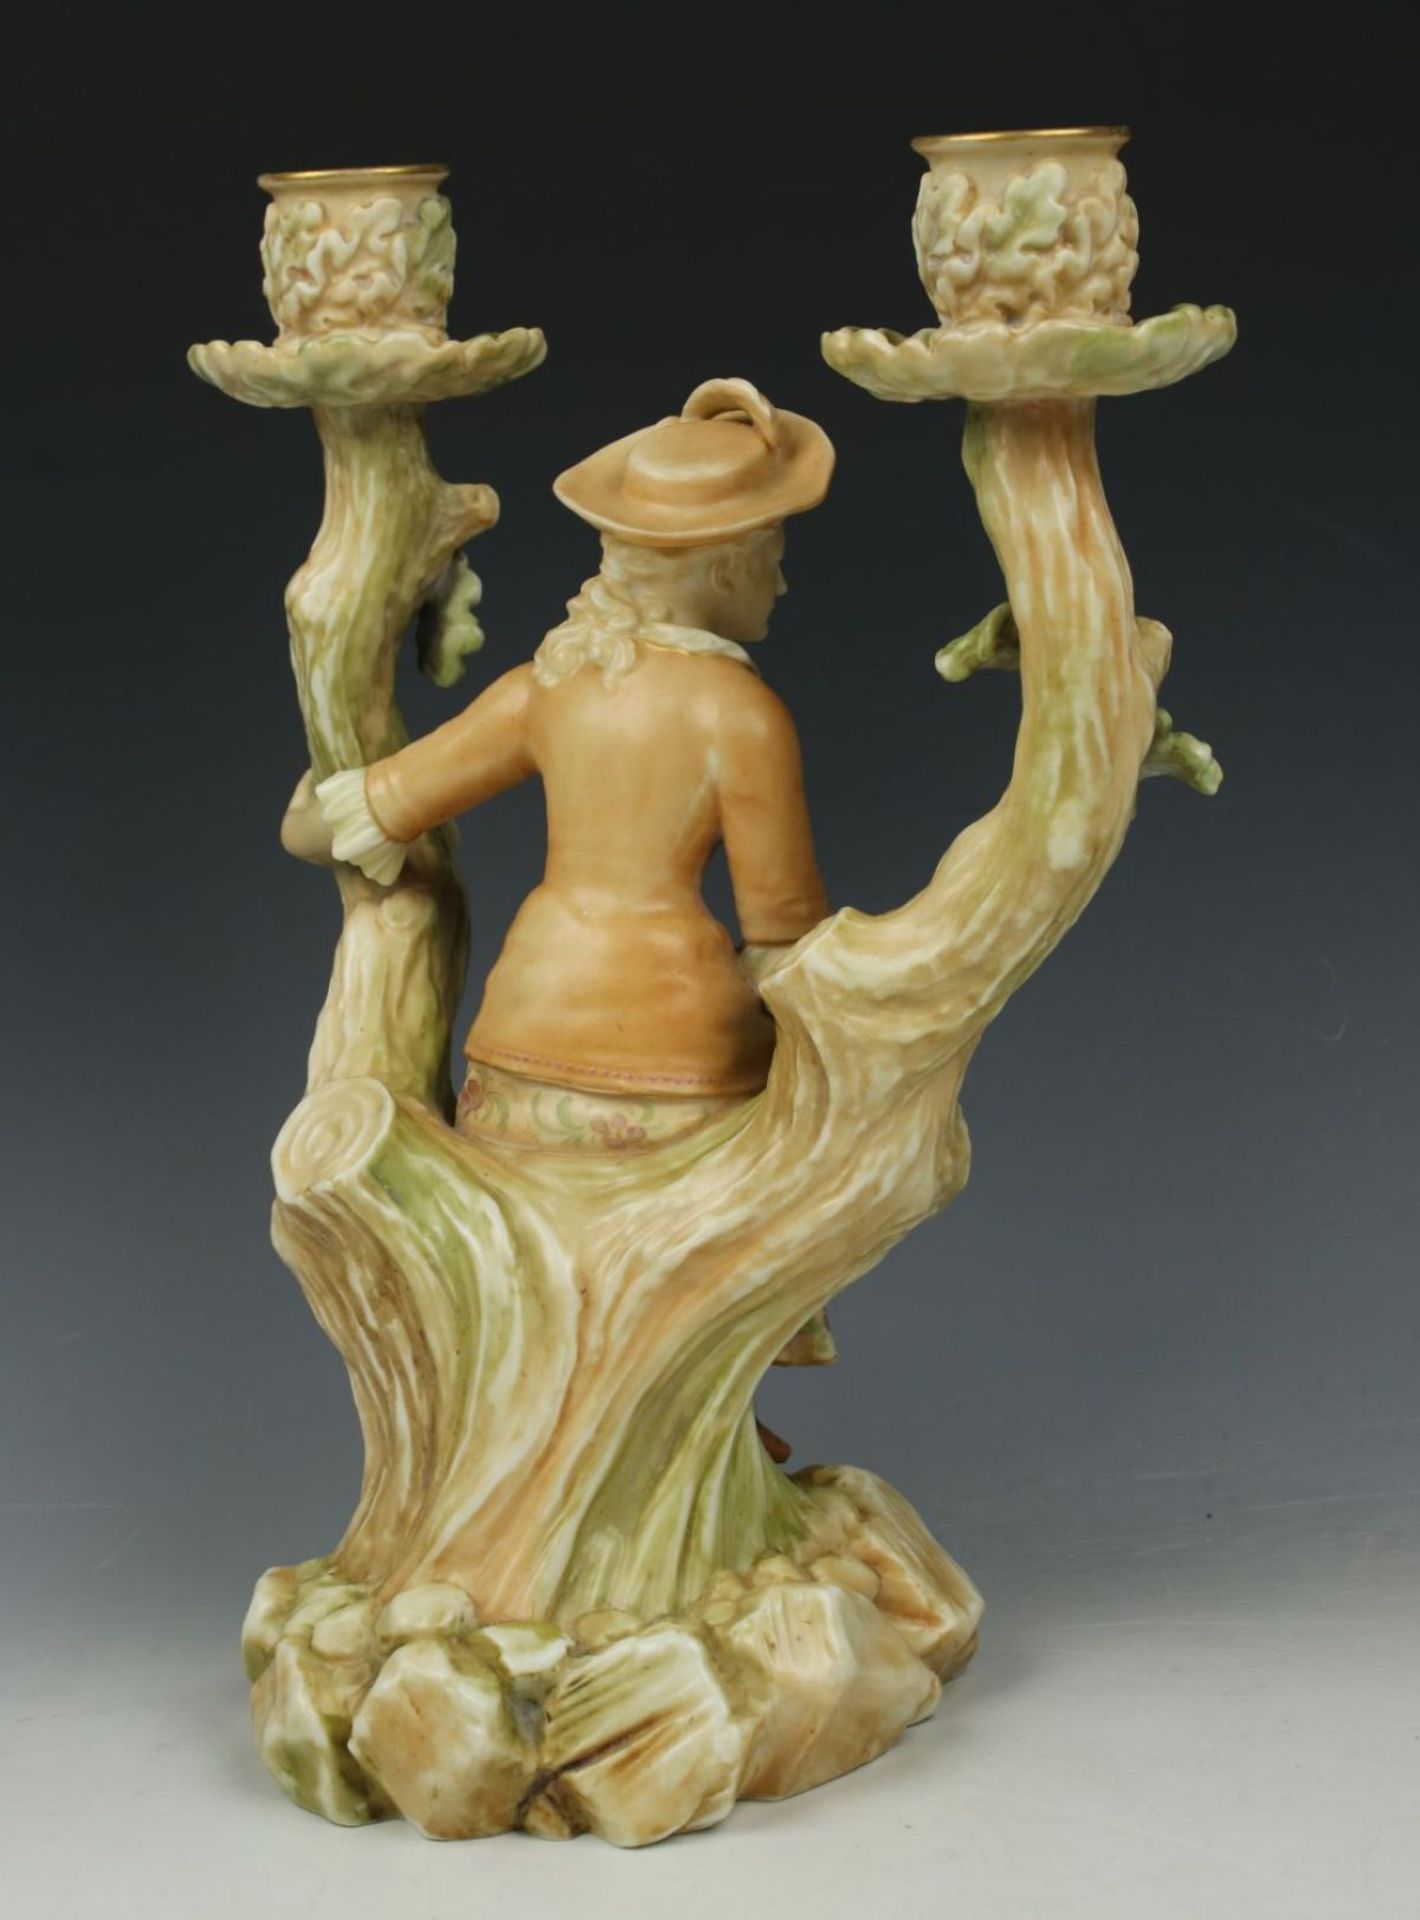 19C Royal Worcester figurine "Candle Holder with Sitting Woman" - Image 5 of 10